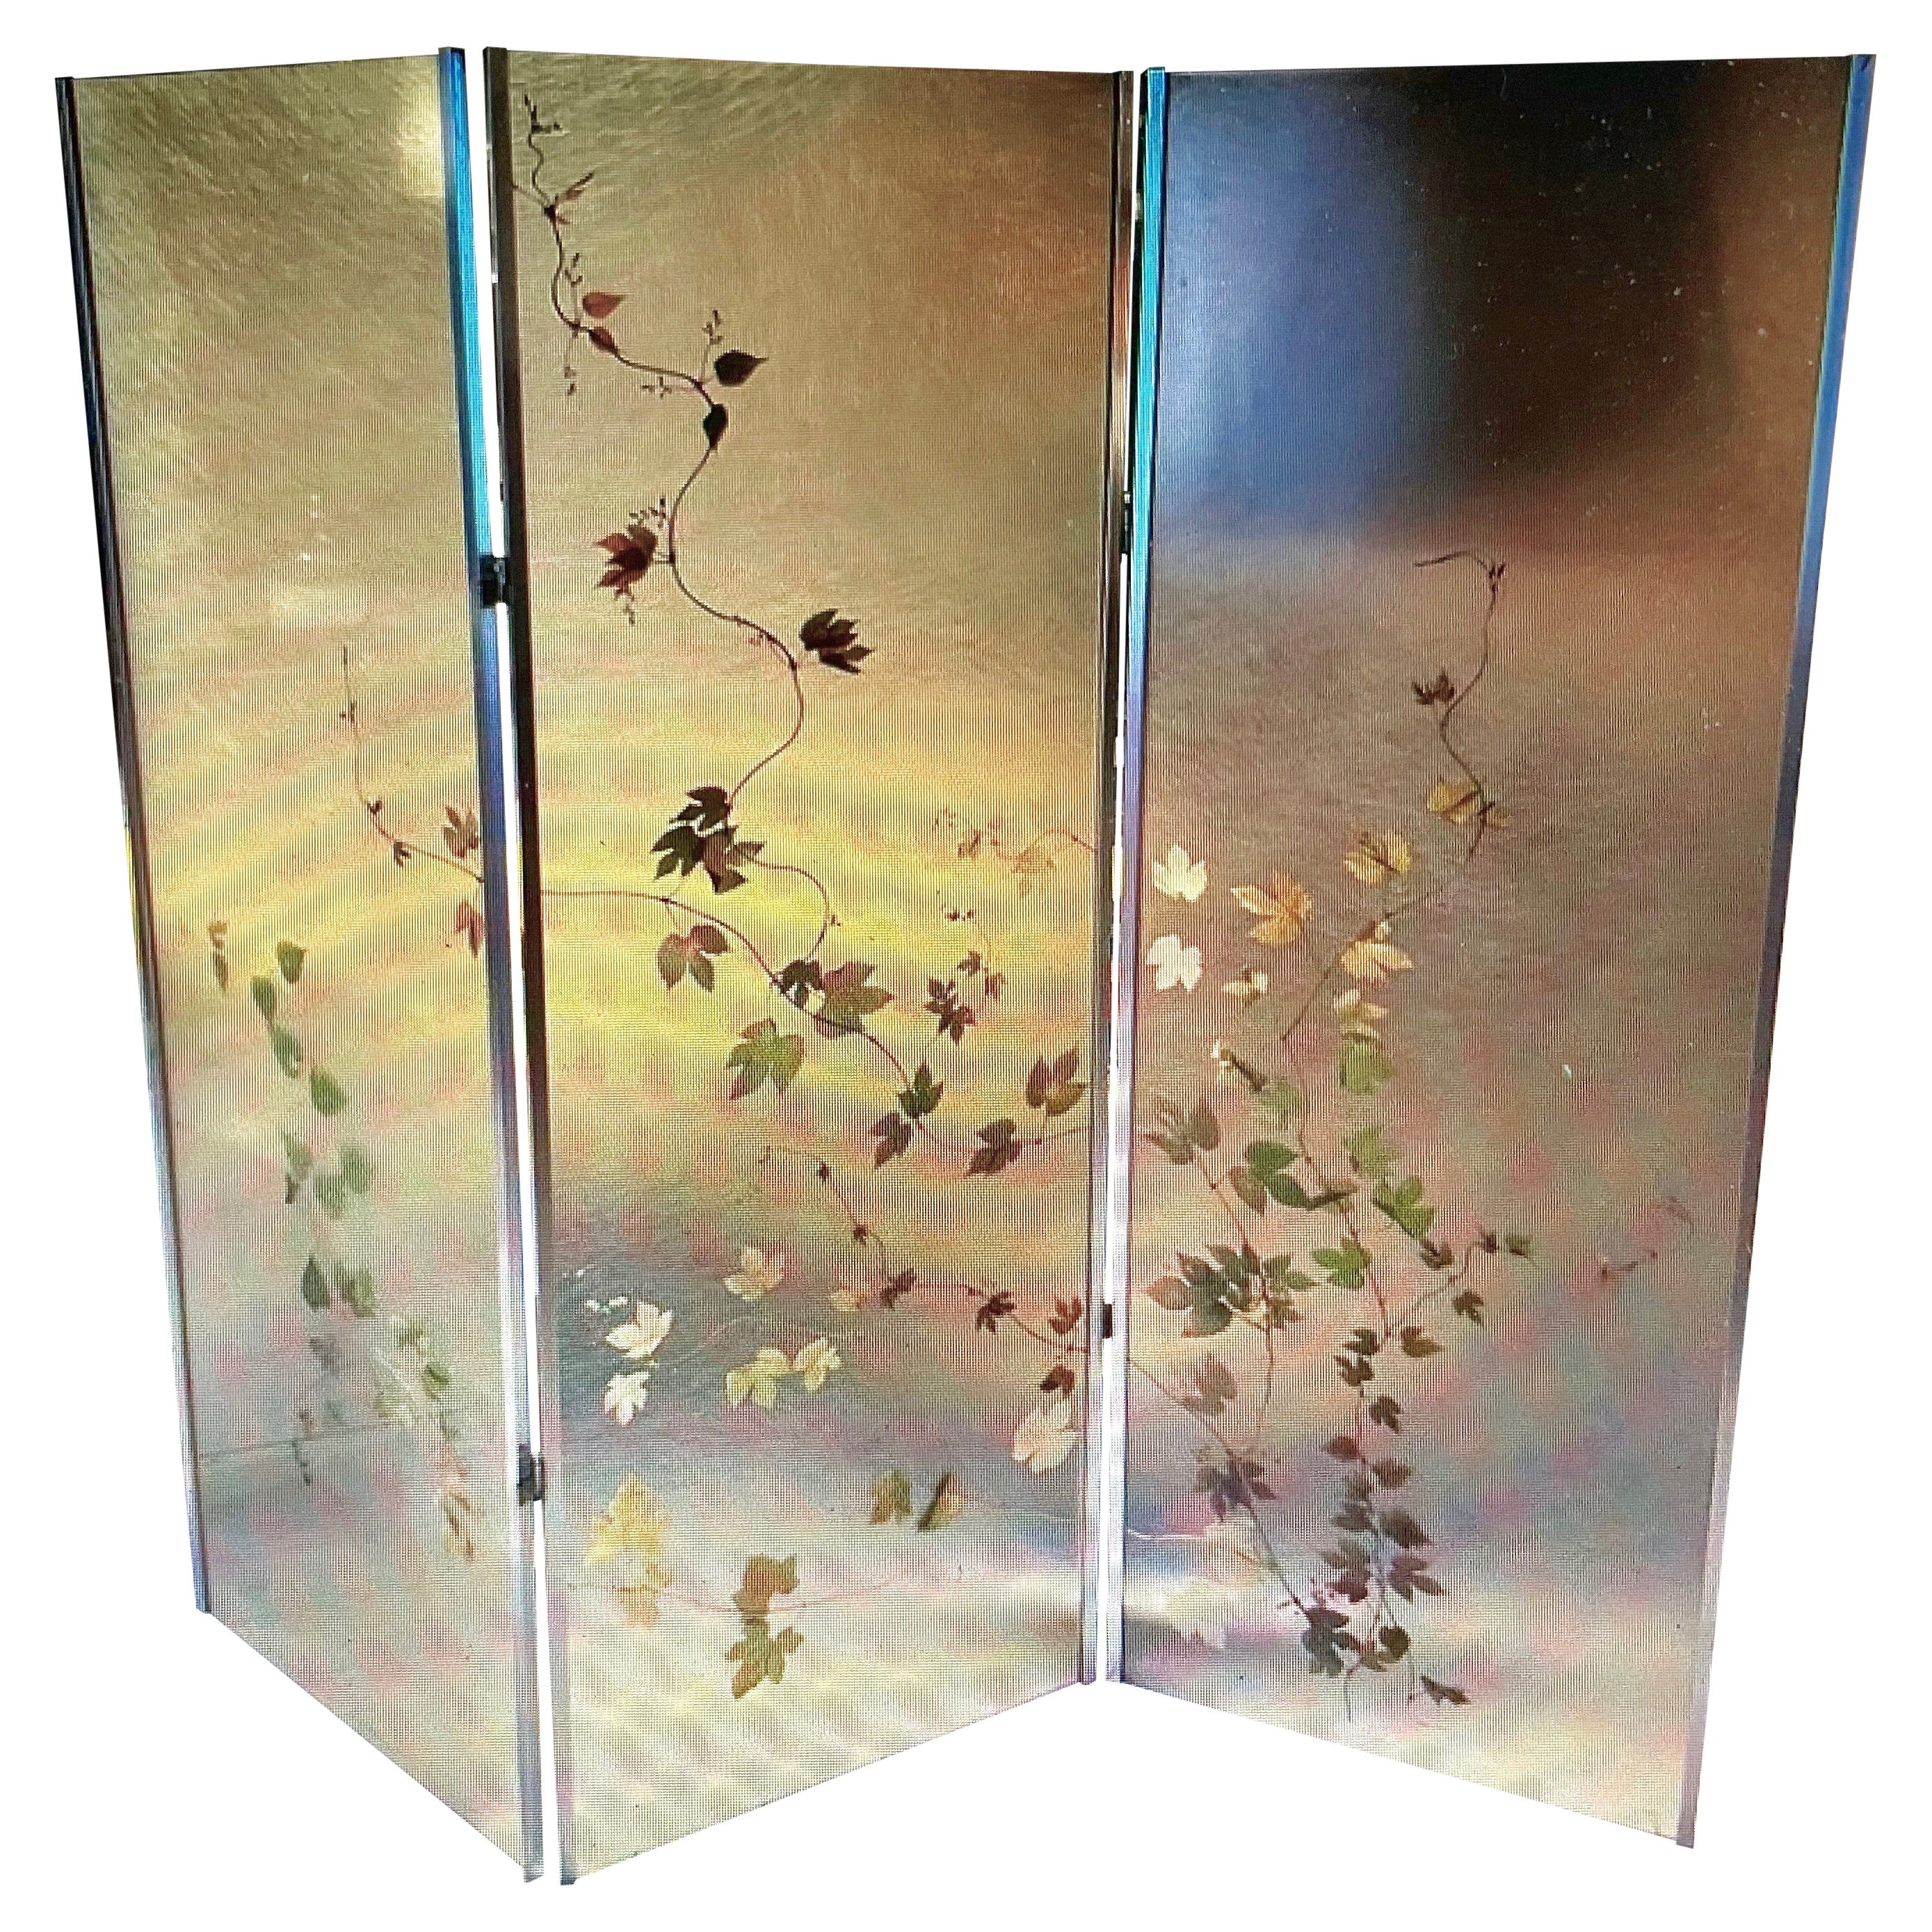 Three Panels Acrylic "Herbier" Screen With Foliage Inclusions, France 1970.